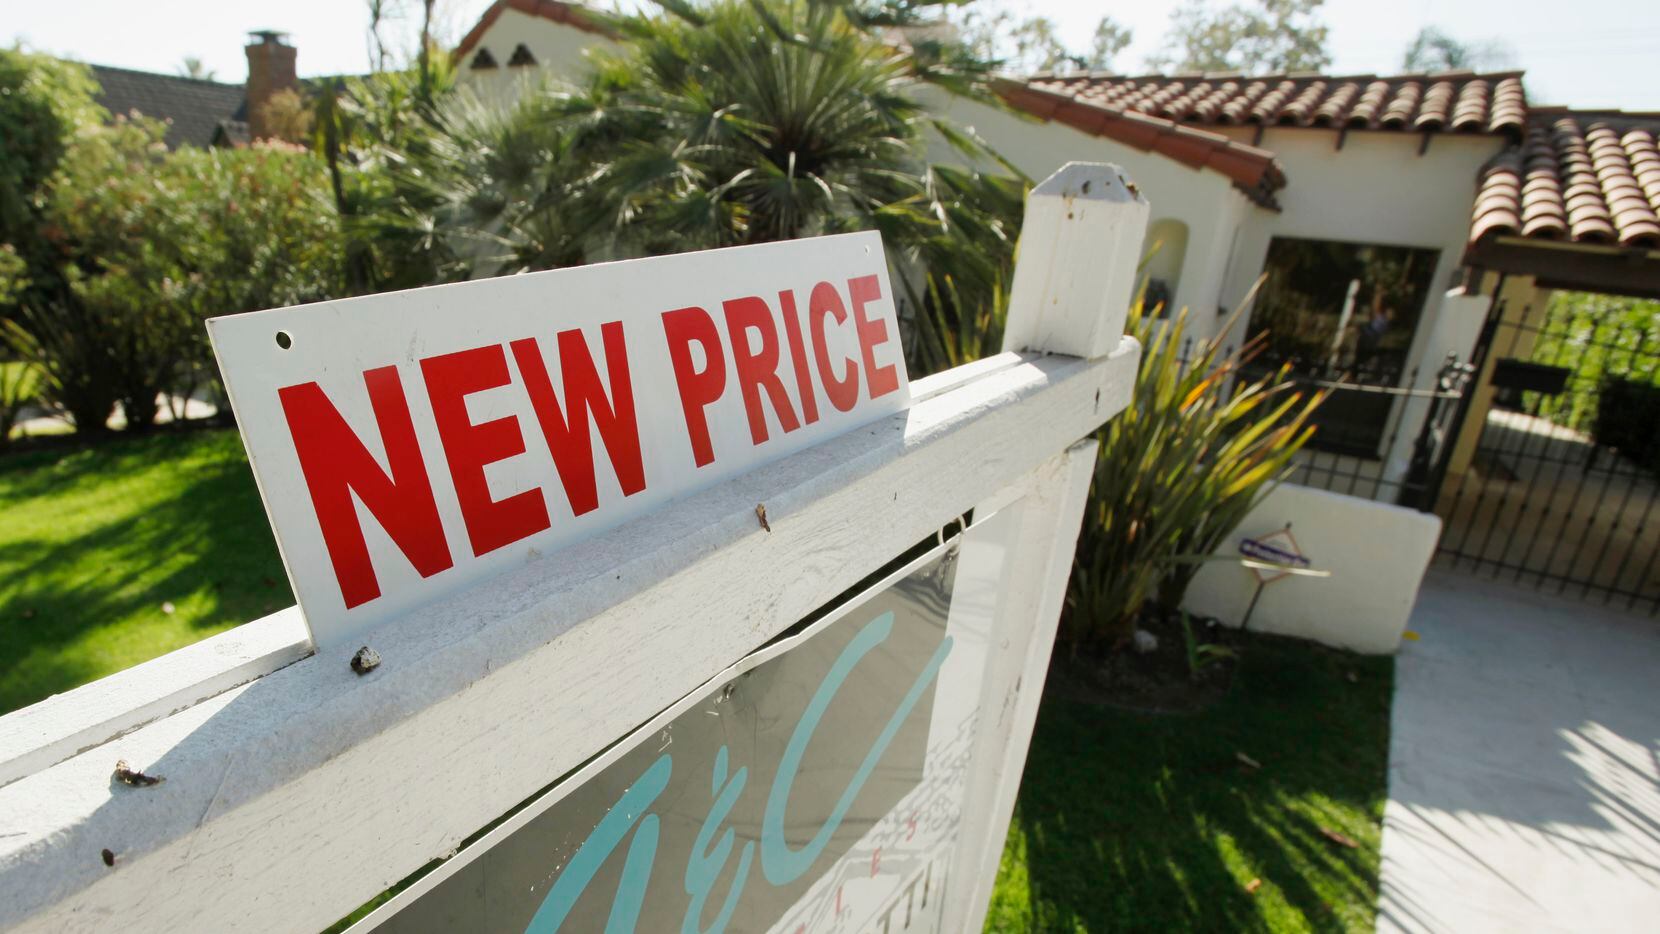 Home sales prices were up 26% in North Texas in May.